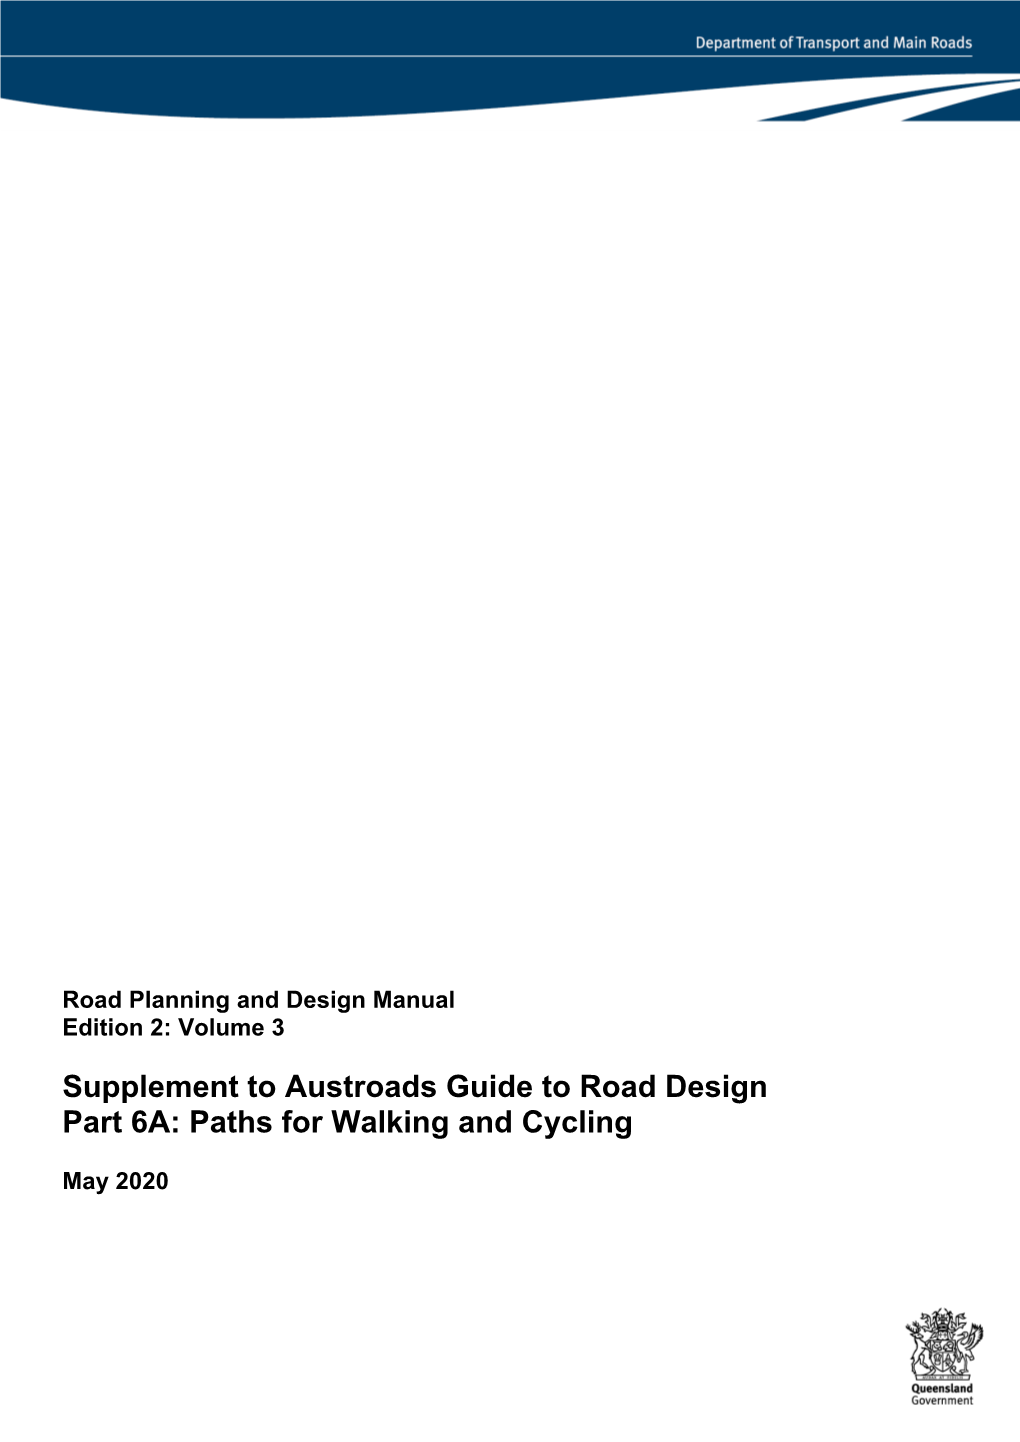 Supplement to Austroads Guide to Road Design Part 6A: Paths for Walking and Cycling